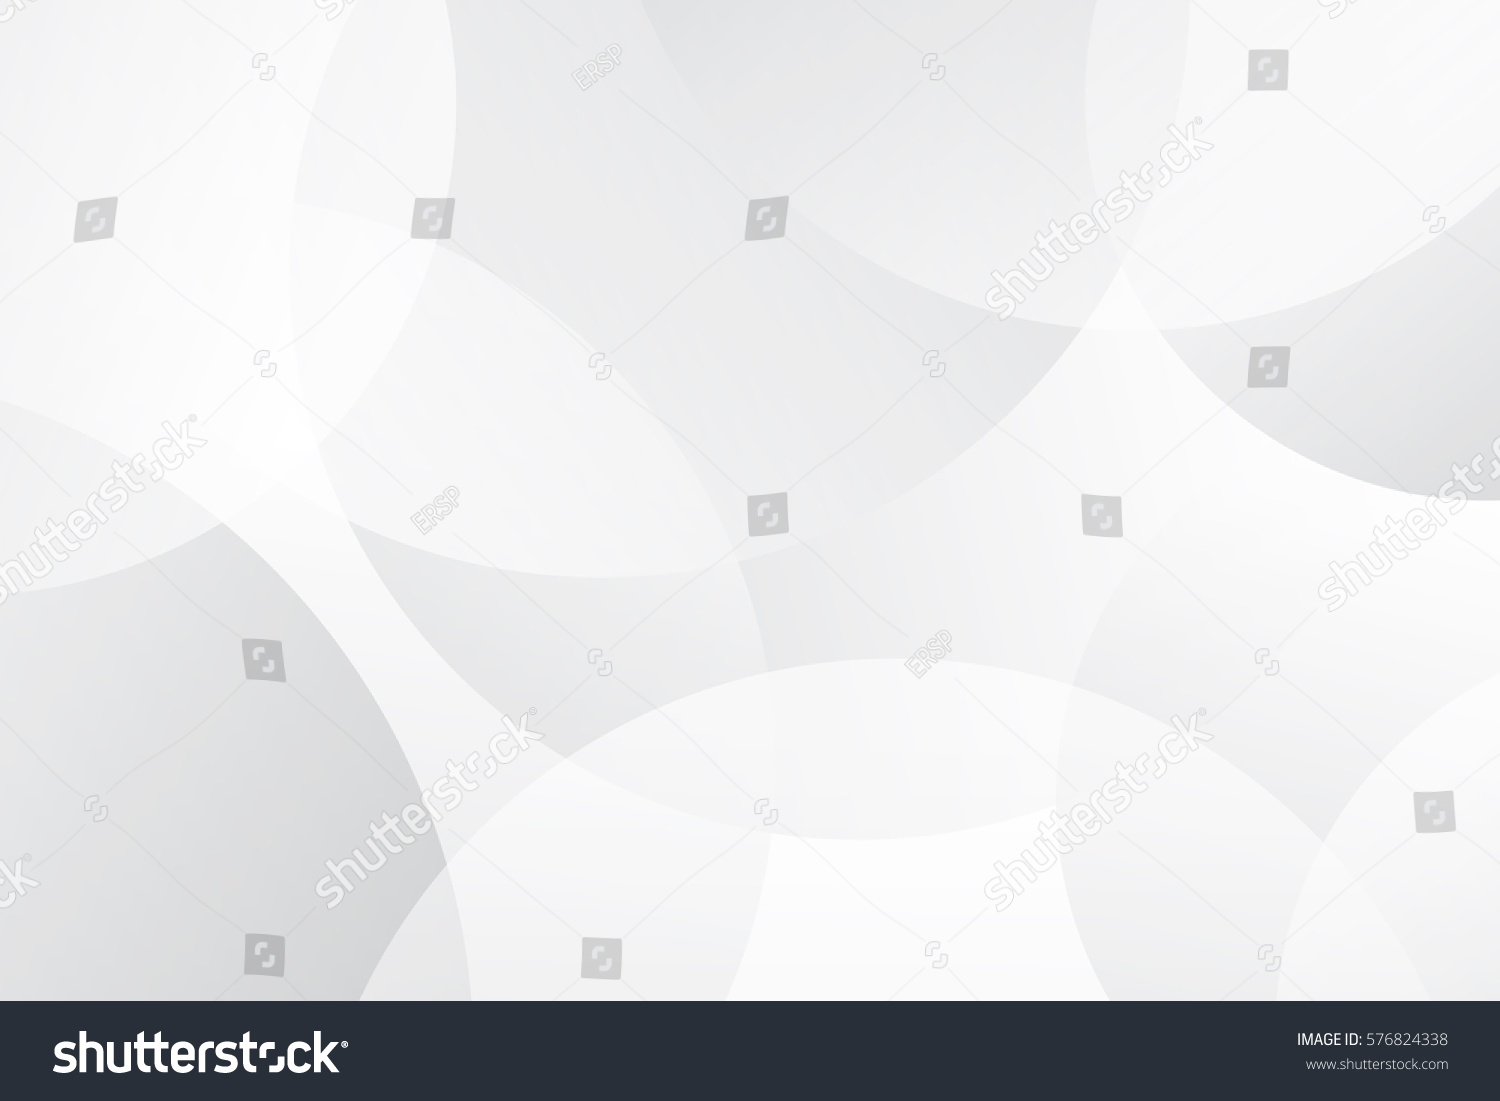 White abstract modern transparency circle presentation background #576824338